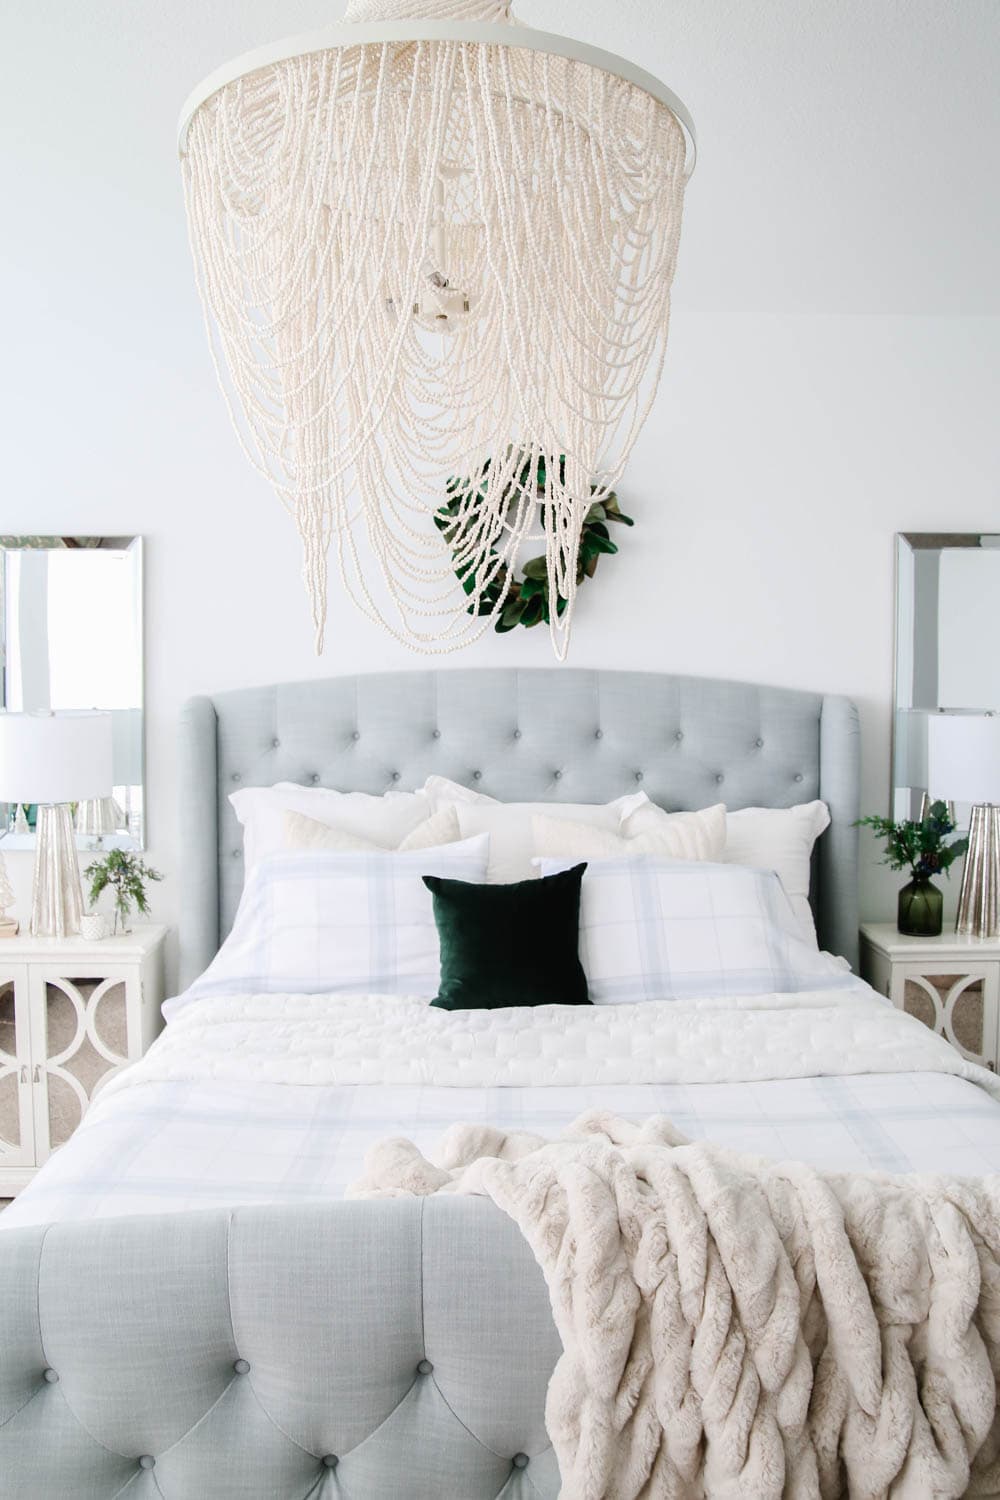 Simple tips to get your bedroom holiday ready. #ABlissfulNest #bedroomdecor #bedroomideas